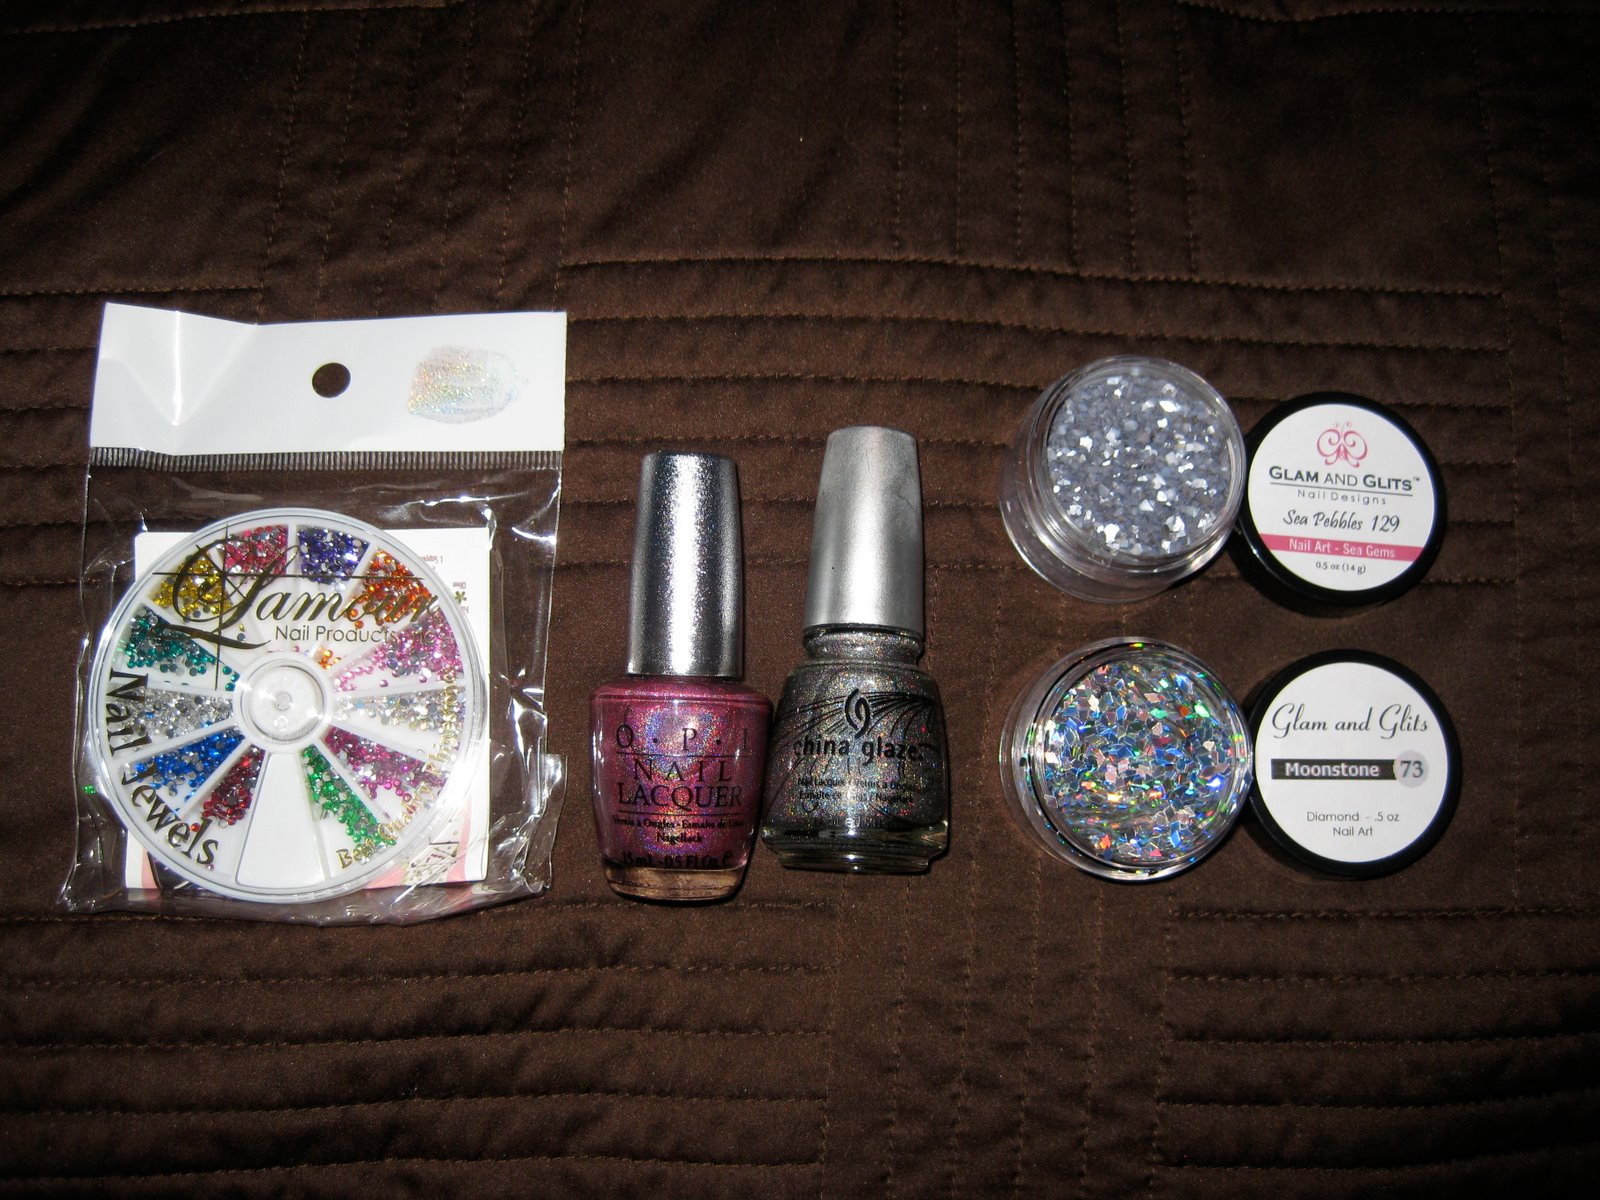 Here are some items I purchased at Nationwide Nail Supply